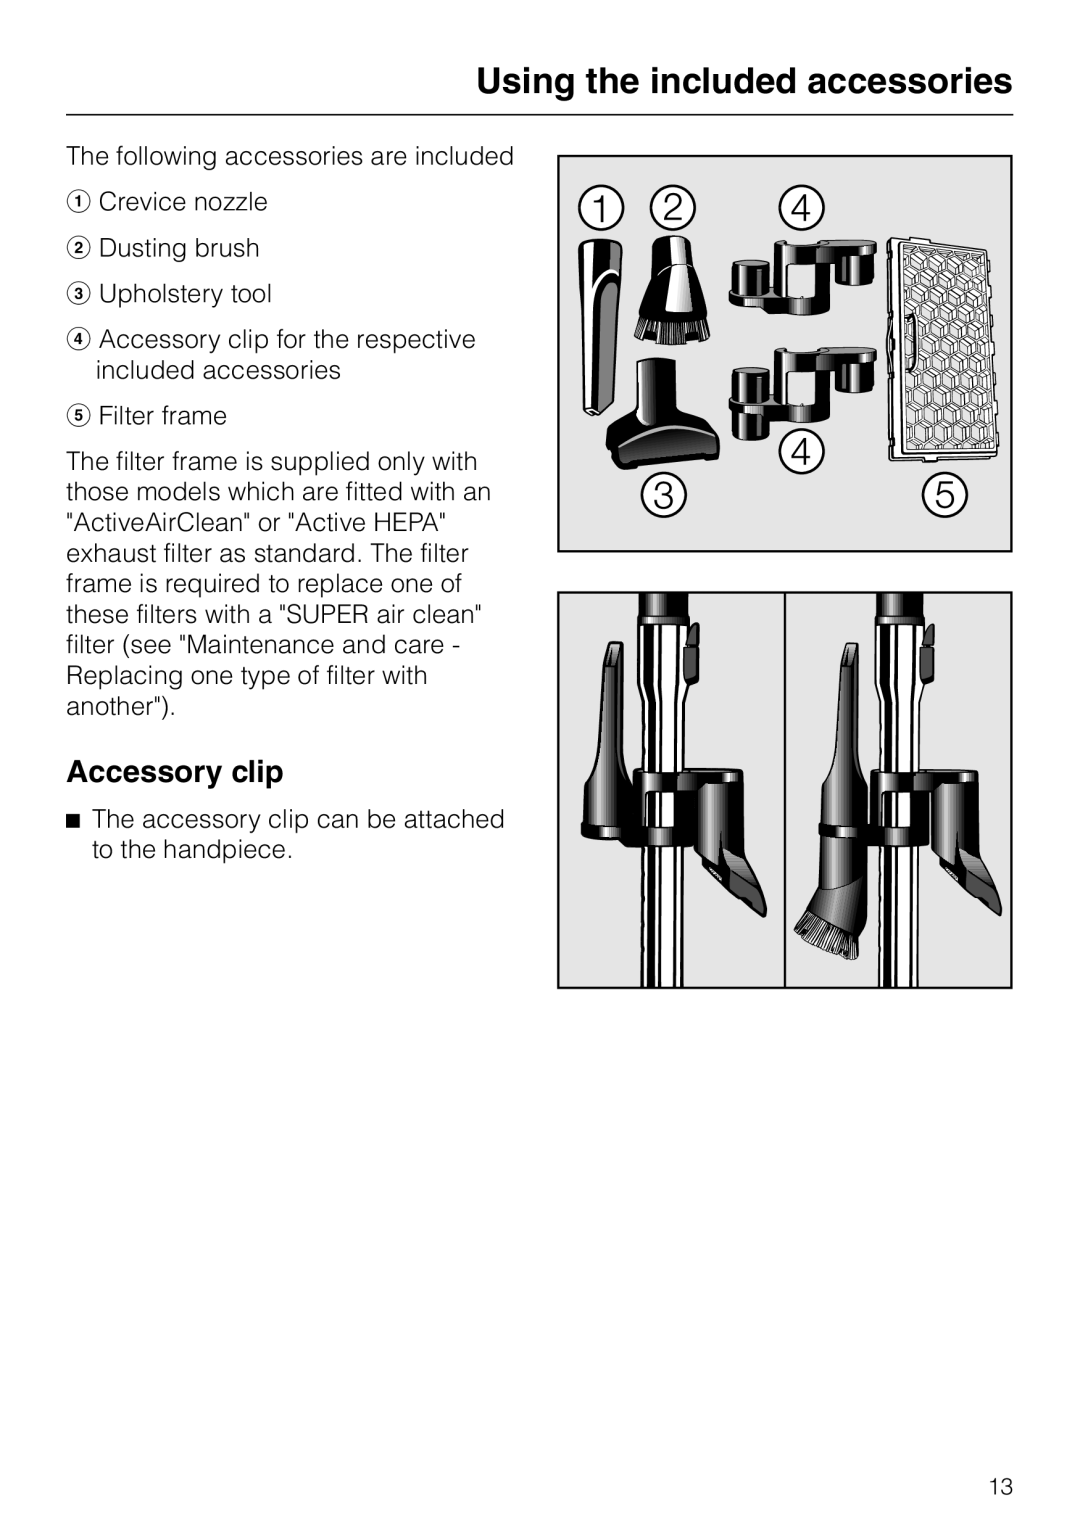 Miele S 4000 manual Using the included accessories, Accessory clip 